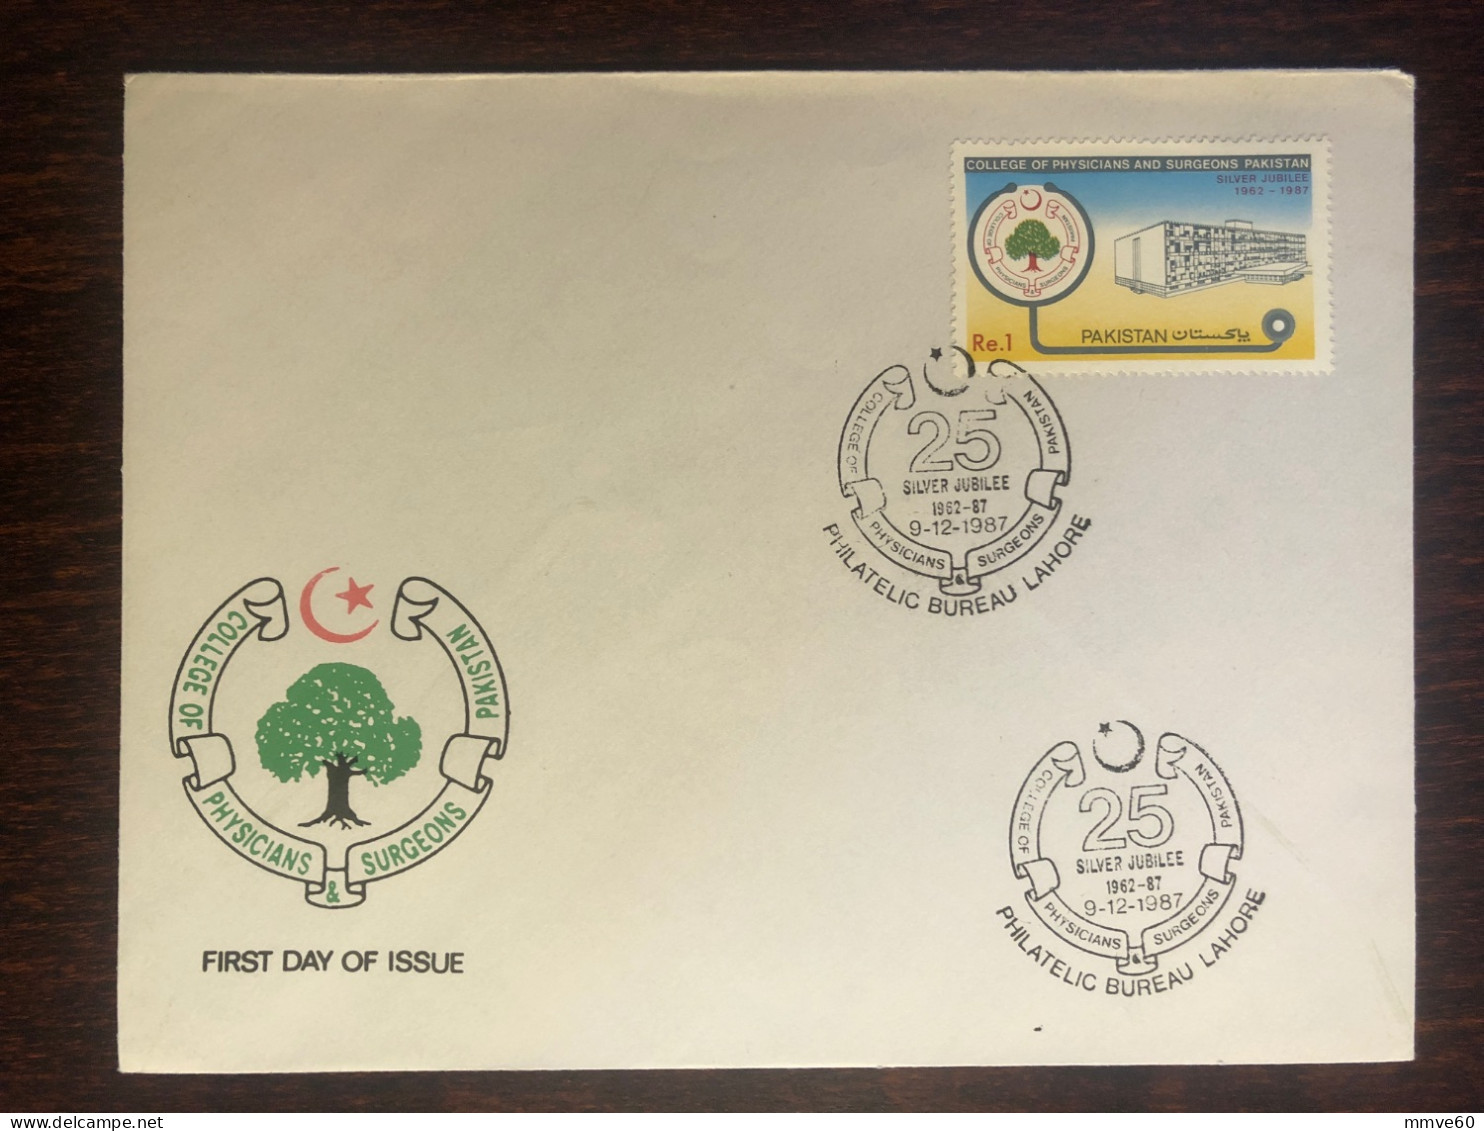 PAKISTAN FDC COVER 1987 YEAR COLLEGE OF PHYSICIANS AND SURGEONS HEALTH MEDICINE STAMPS - Pakistan